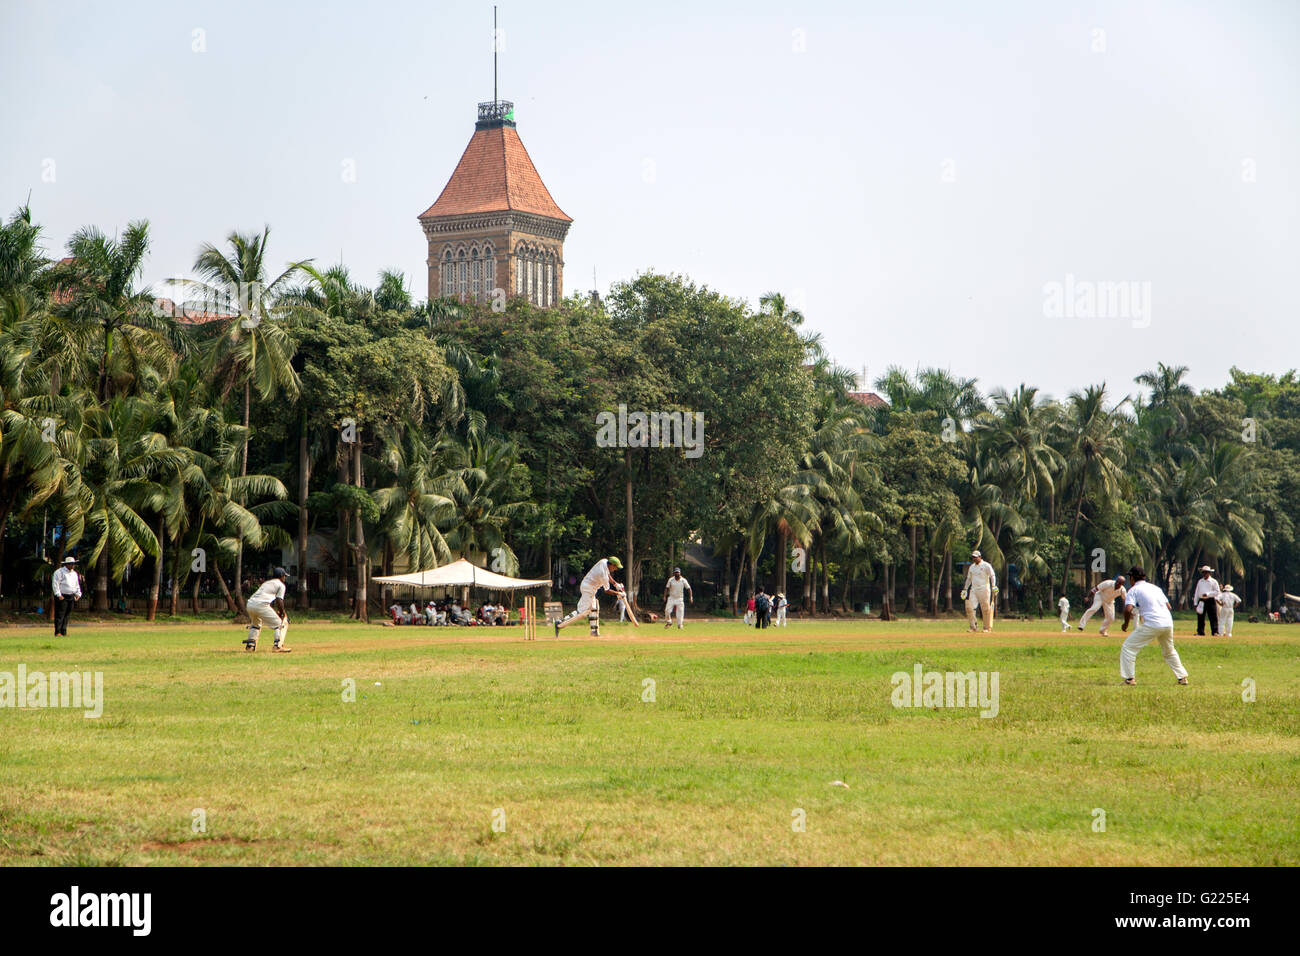 MUMBAI, INDIA - OCTOBER 10, 2015: People playing cricket in the central park at Mumbai, India. Cricket is the most popular sport Stock Photo